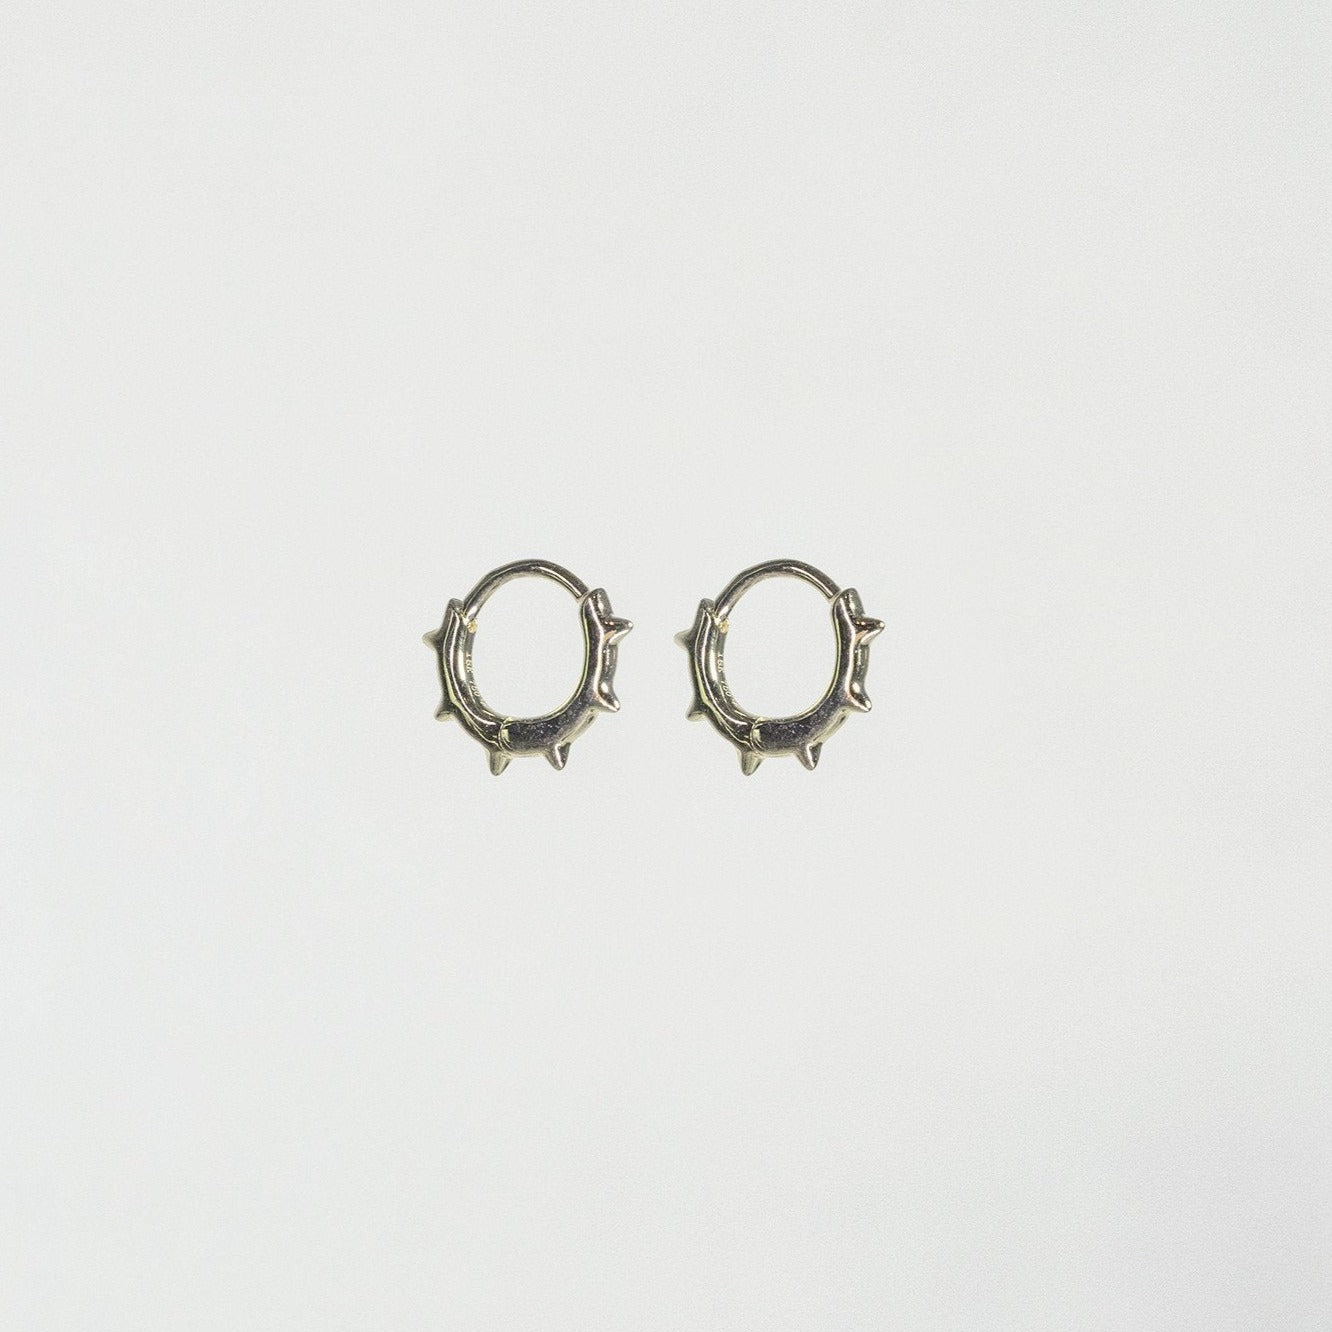 perfect for rim or lobe piercings the hoops have a secure lock mechanism